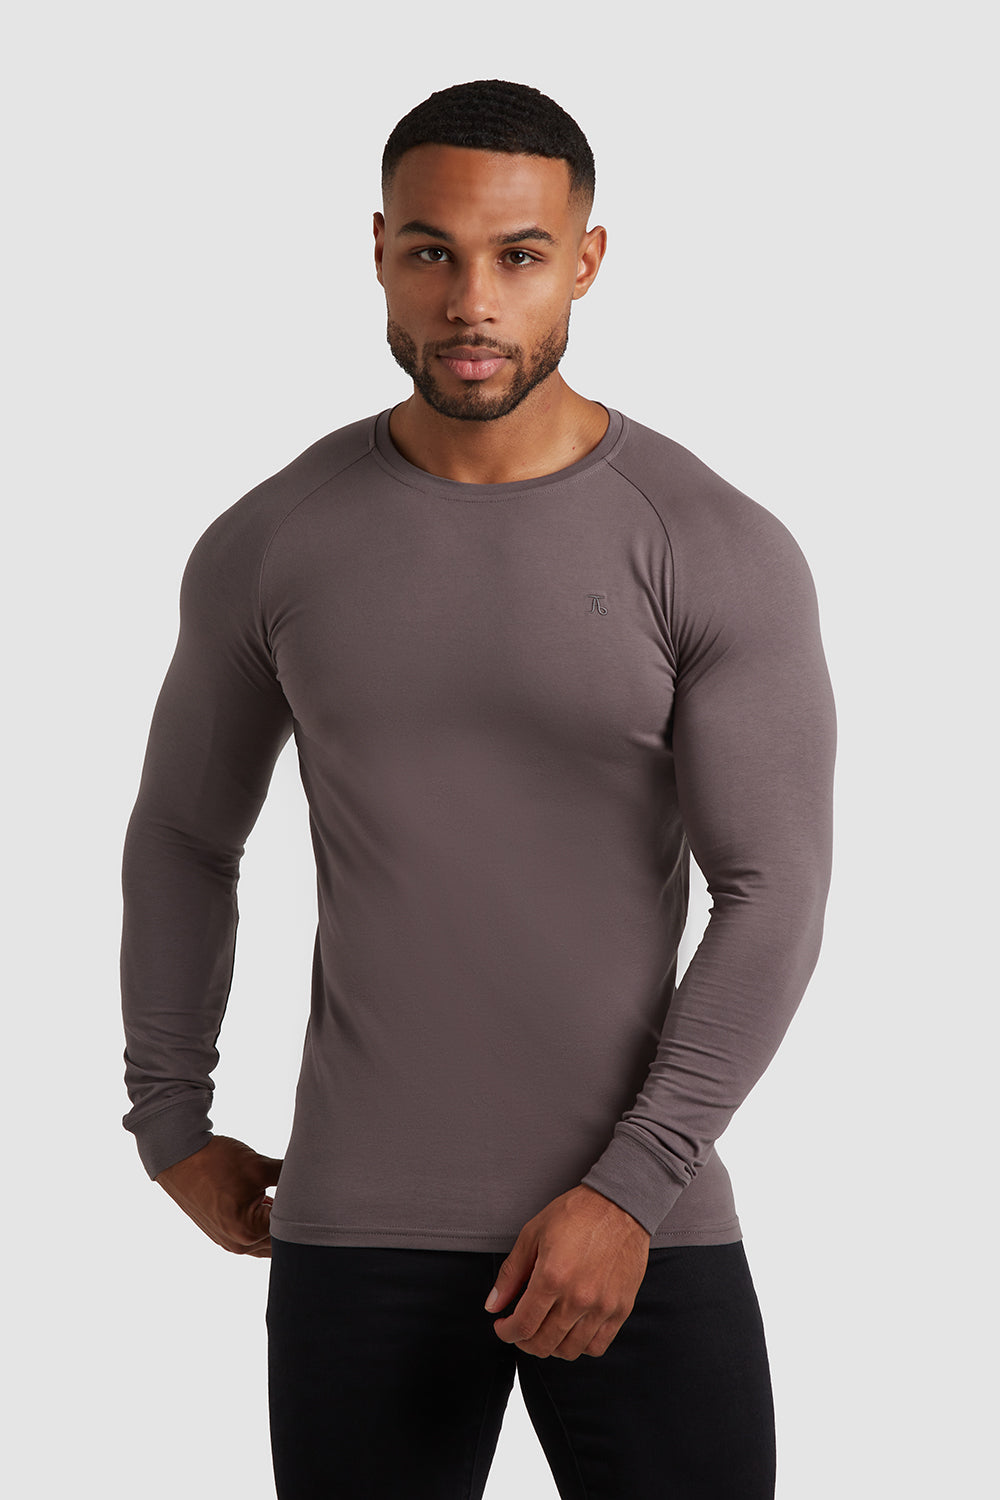 Muscle Fit T-Shirt in Mole - TAILORED ATHLETE - ROW